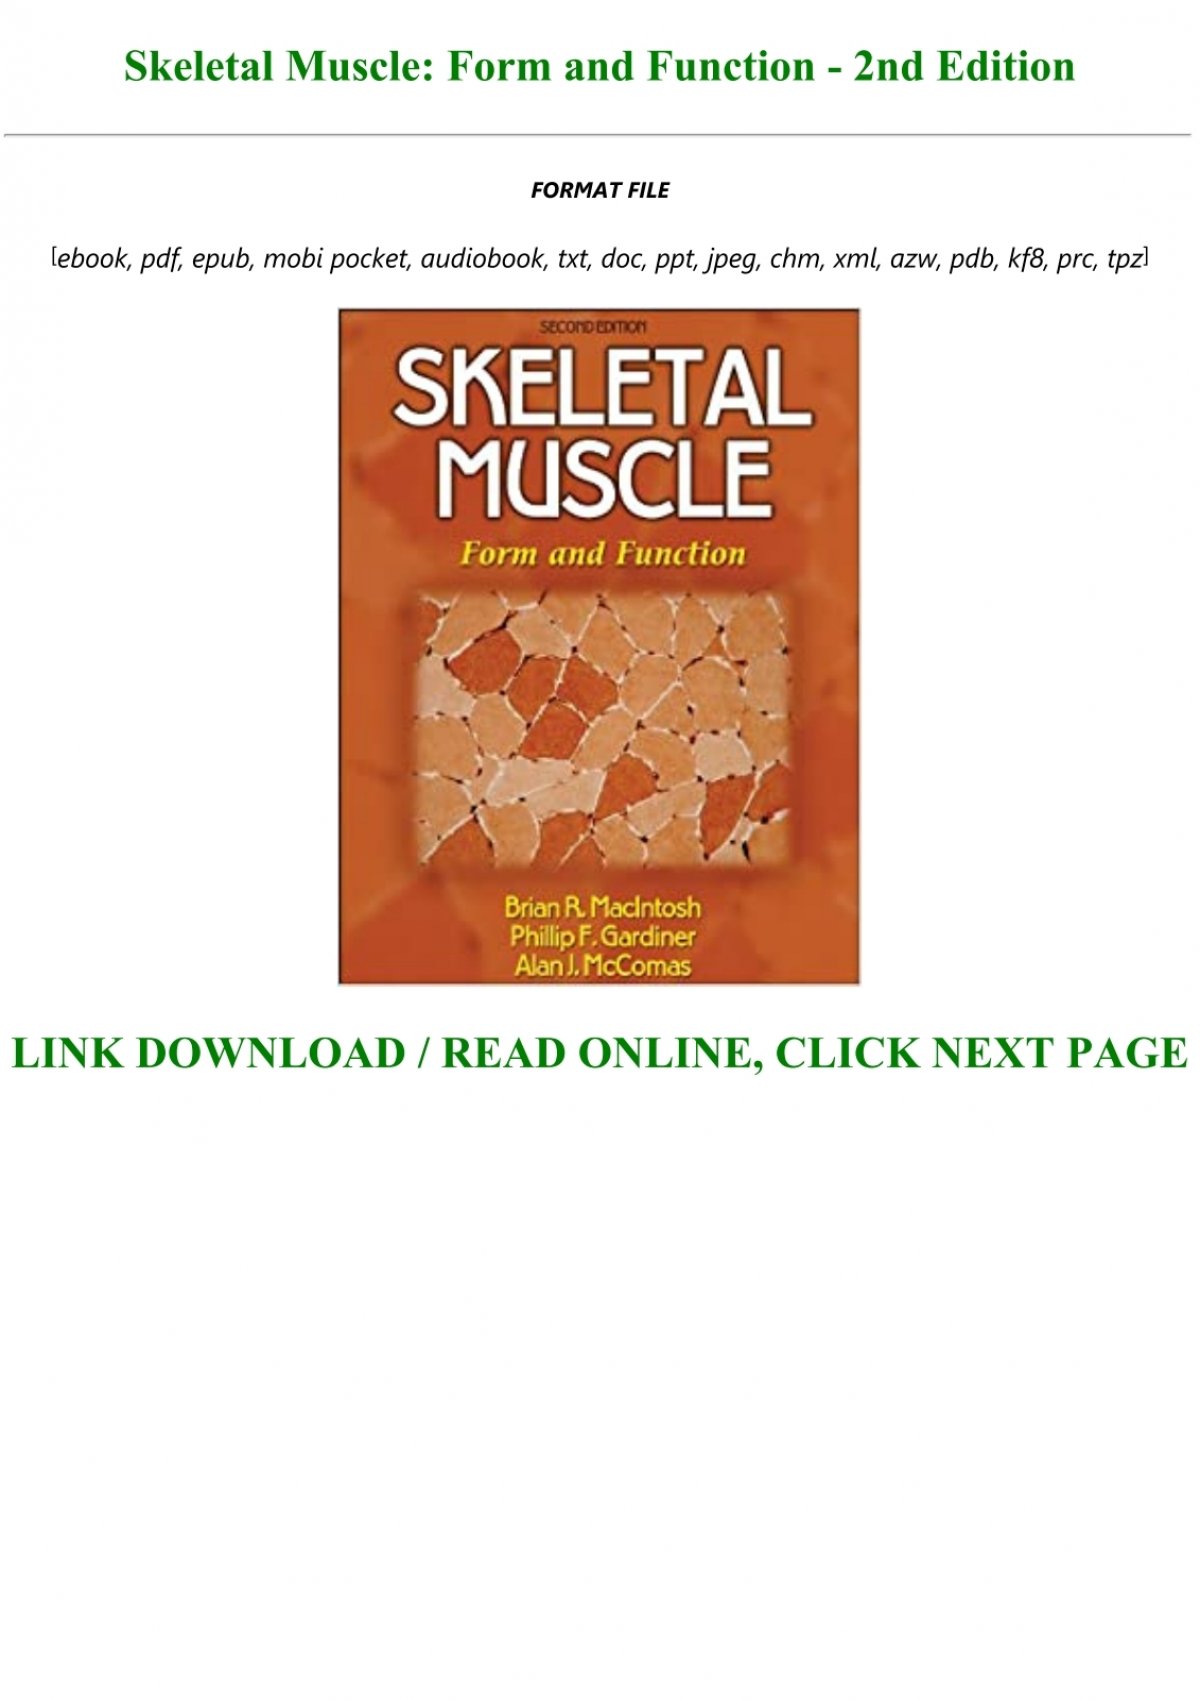 download-pdf-skeletal-muscle-form-and-function-2nd-edition-full